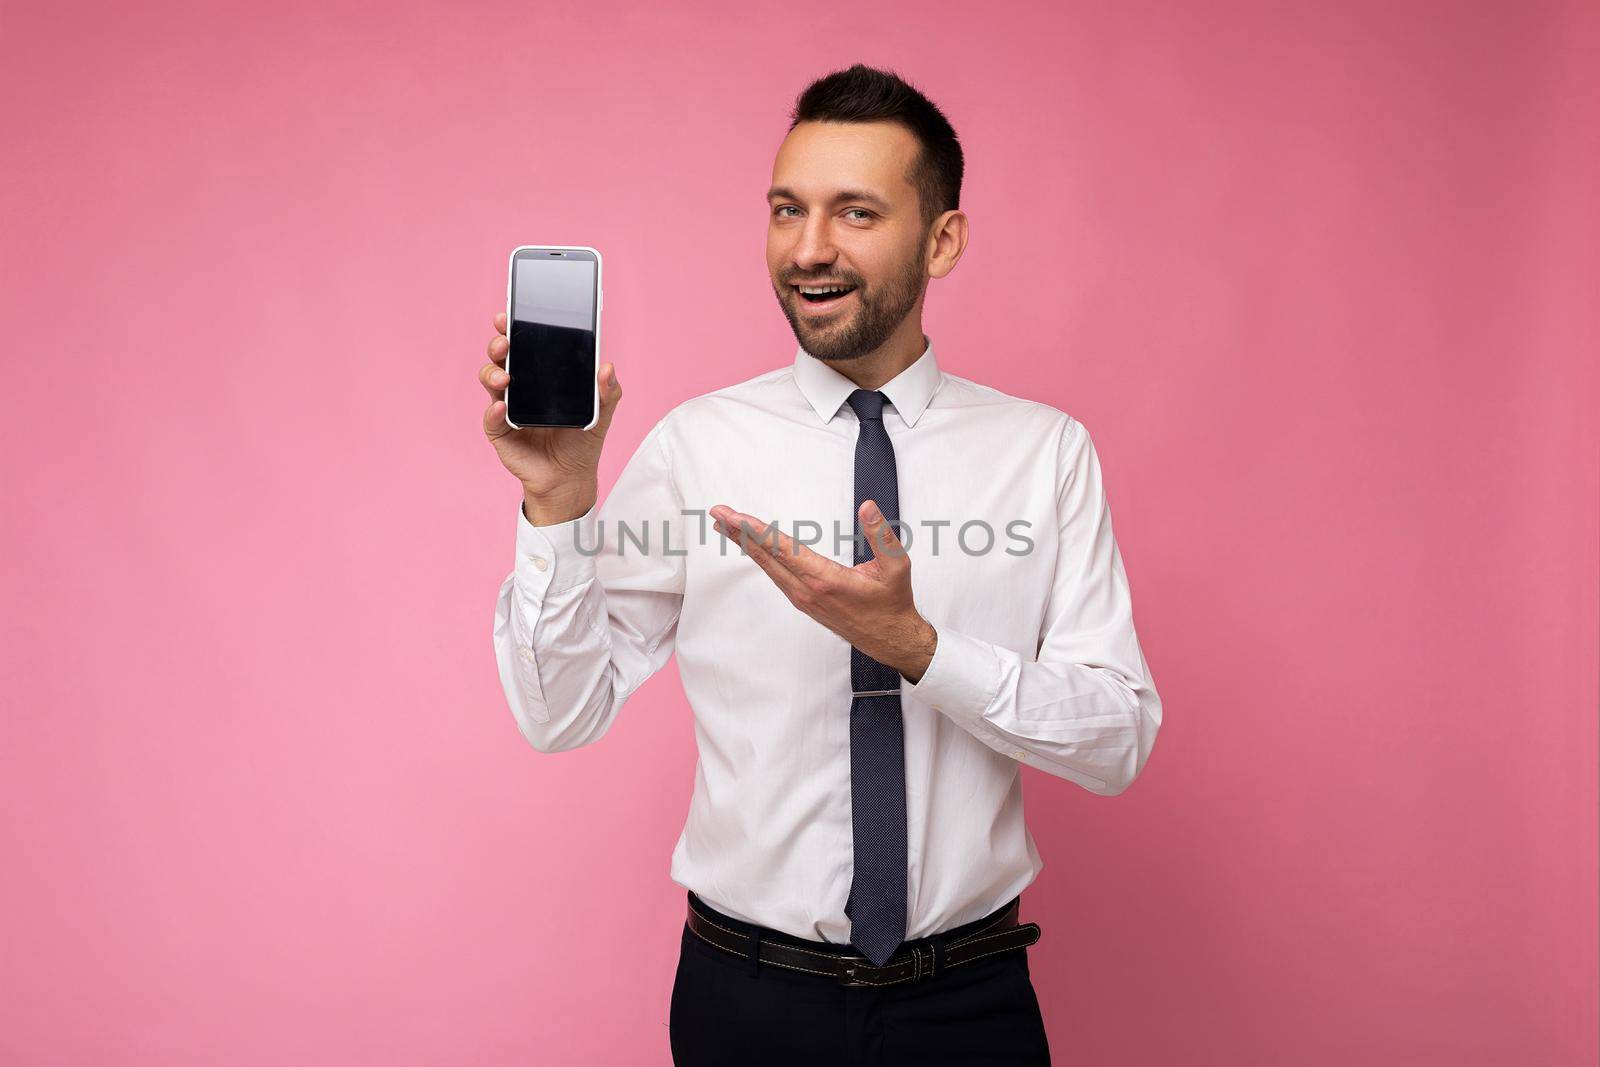 Photo of handsome smiling adult male person good looking wearing casual outfit standing isolated on background with copy space holding smartphone showing phone in hand with empty screen display for mockup pointing at gadjet looking at camera.